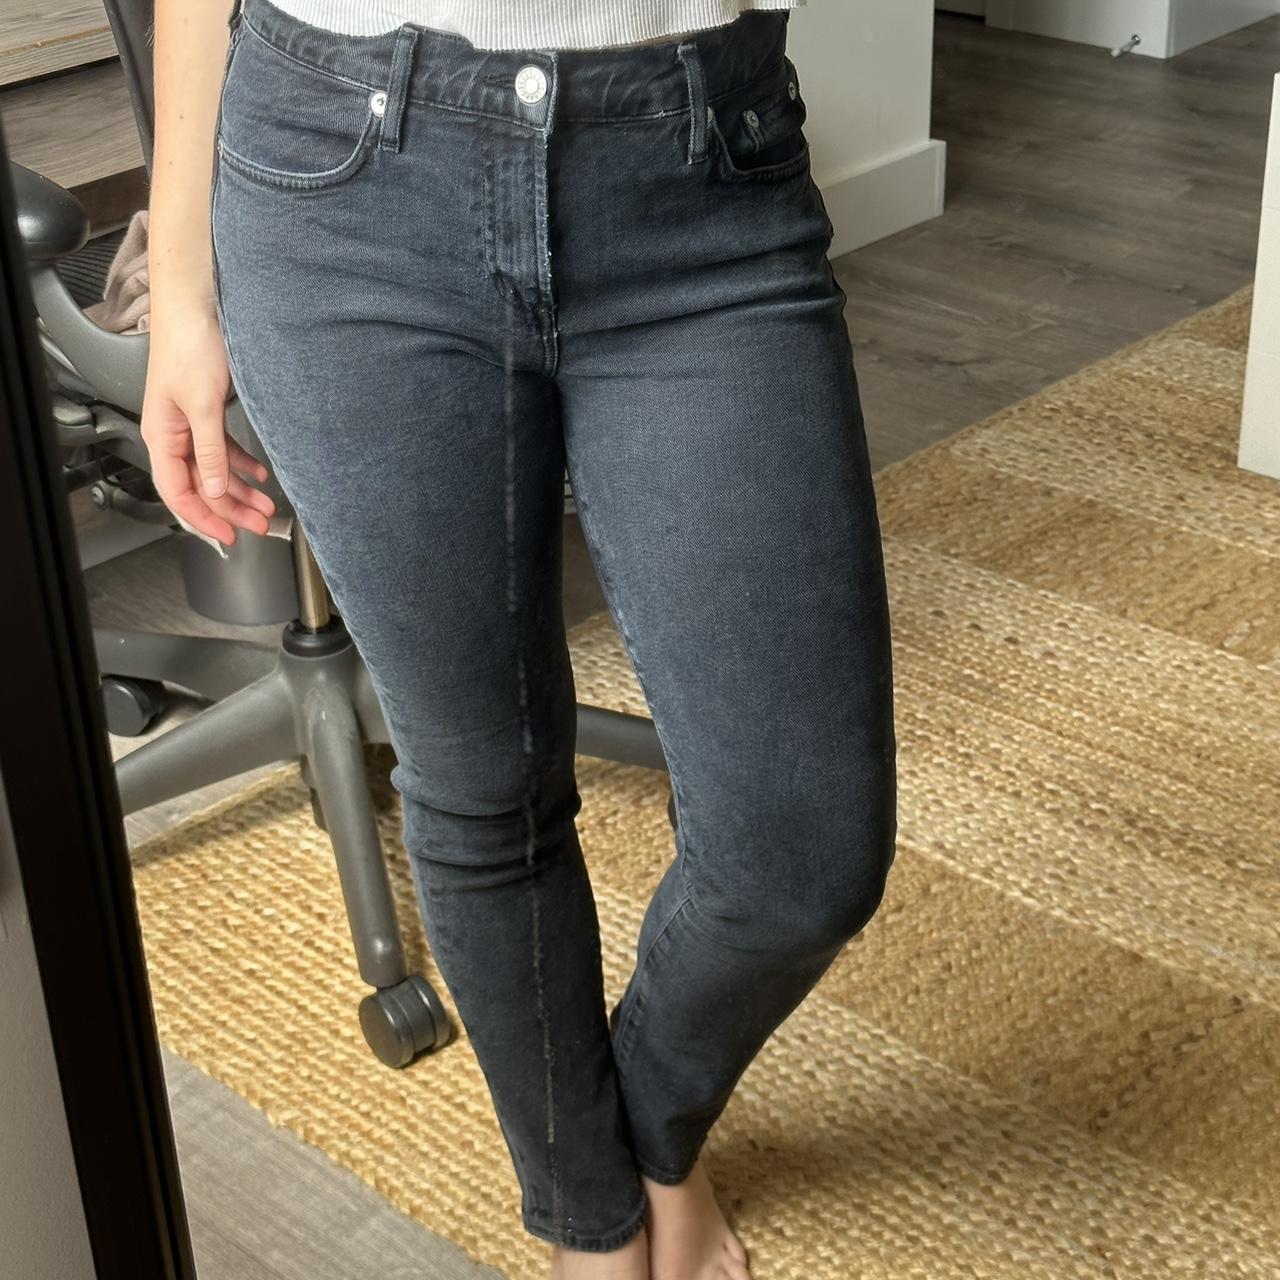 H&M Shaping Skinny High Jeans